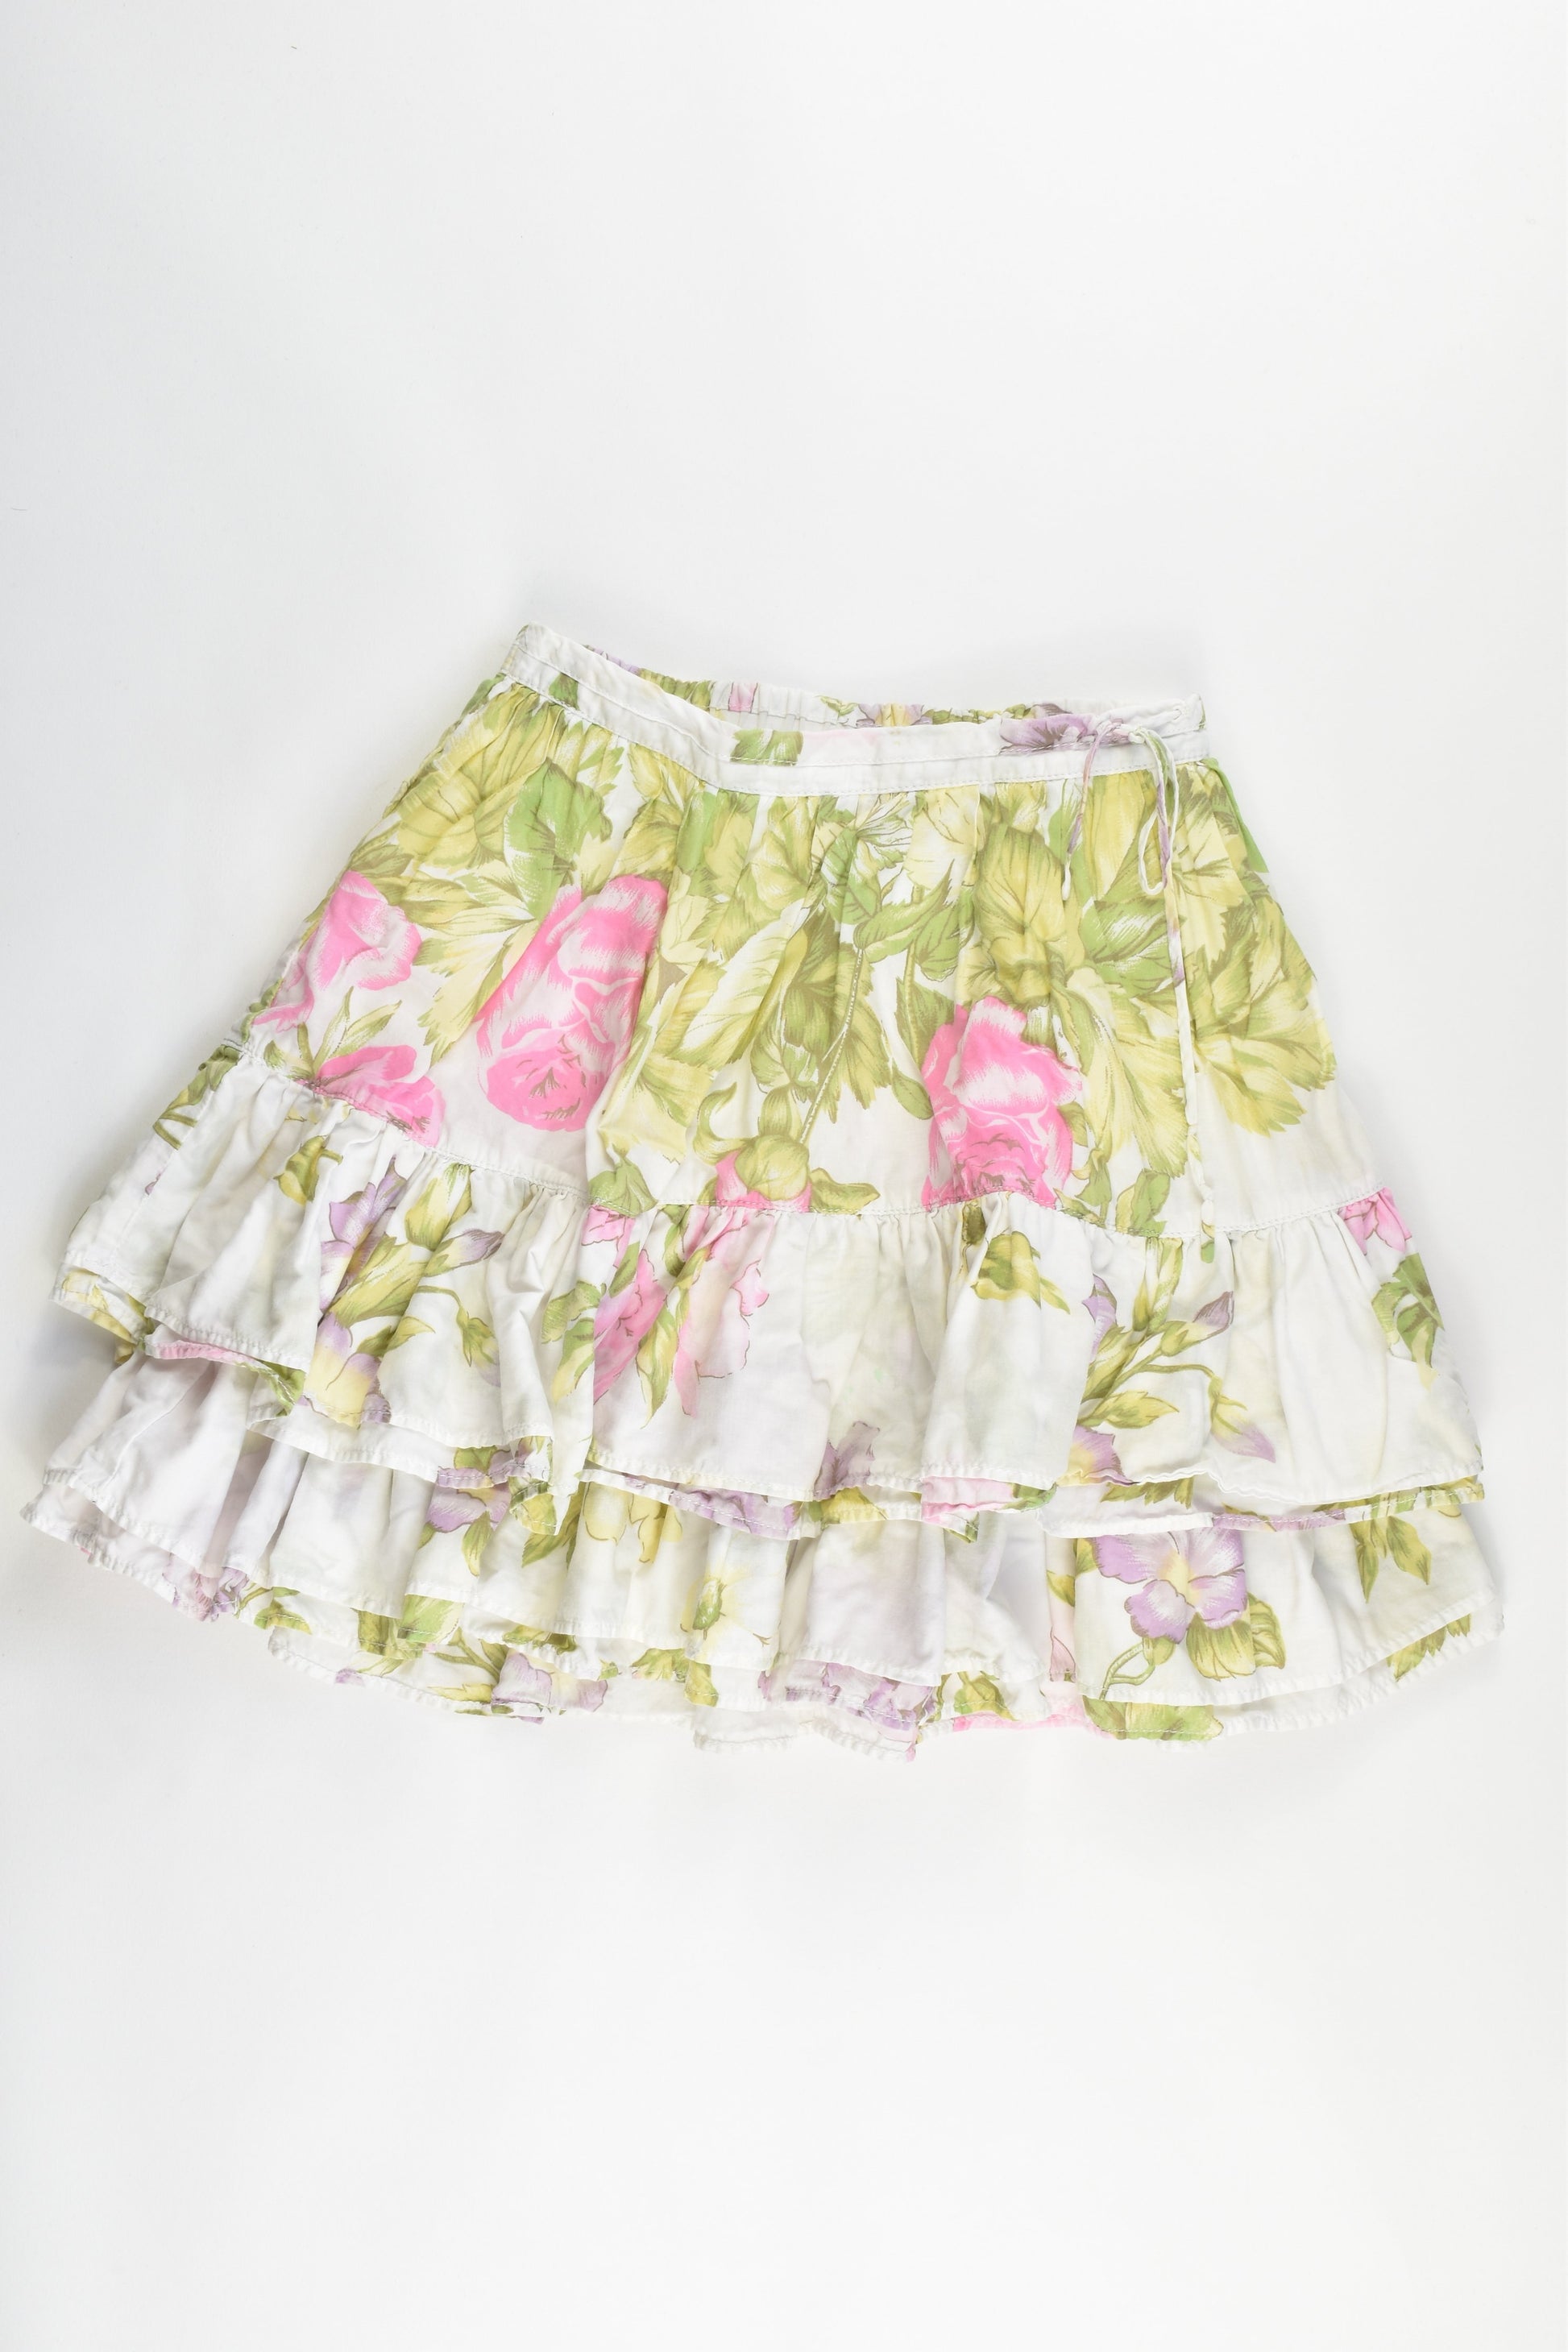 Fred Bare Size 3 (Generous) Layered Skirt